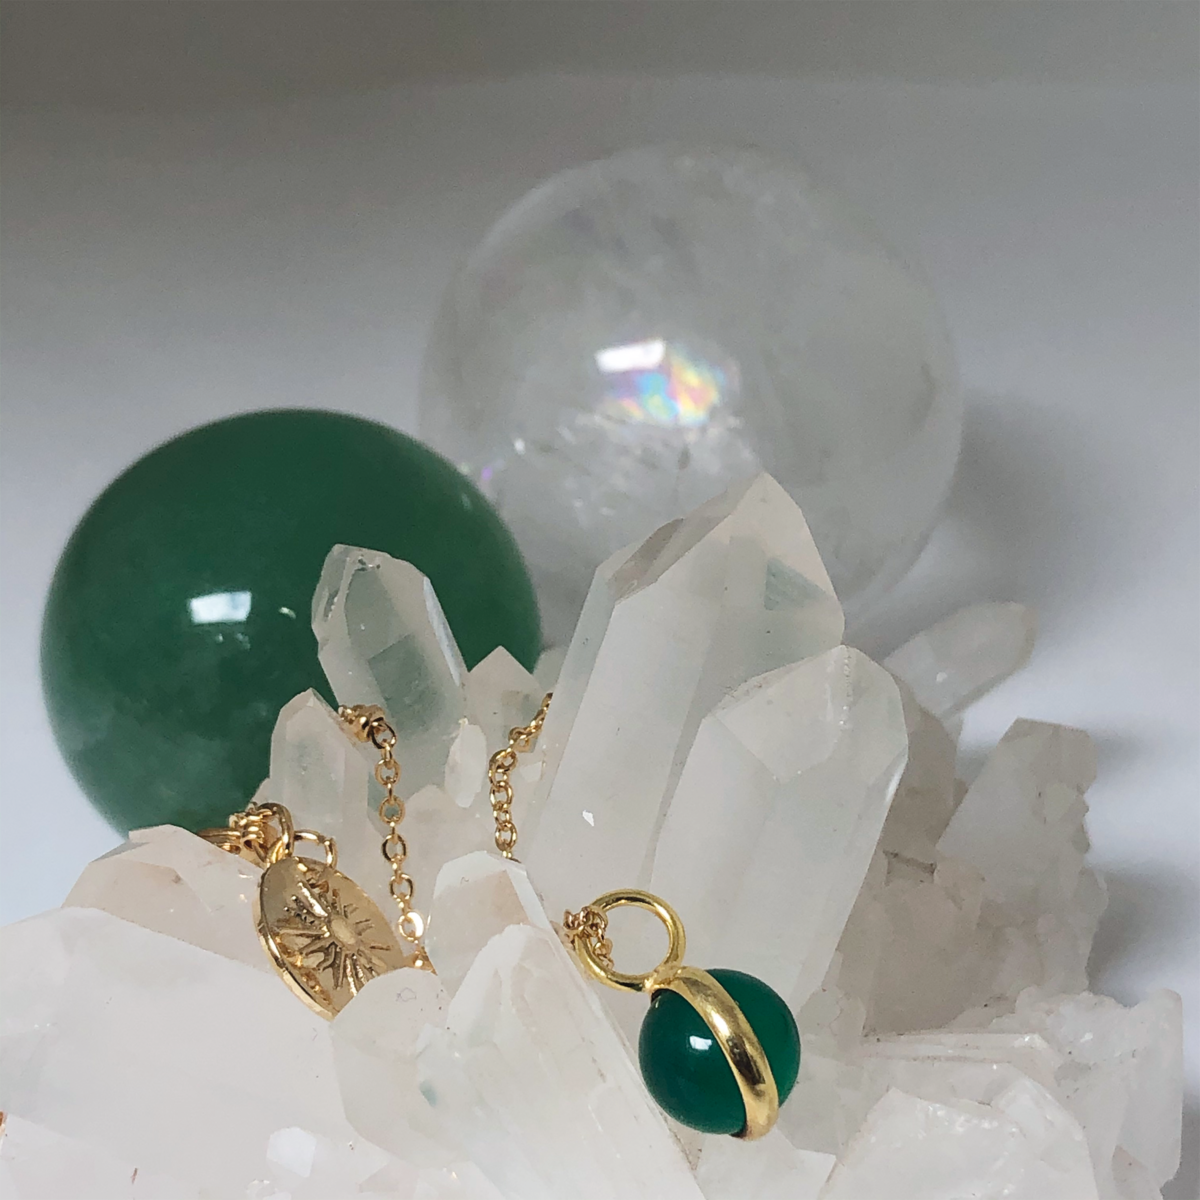 How to Use Crystals to Enhance Intuition